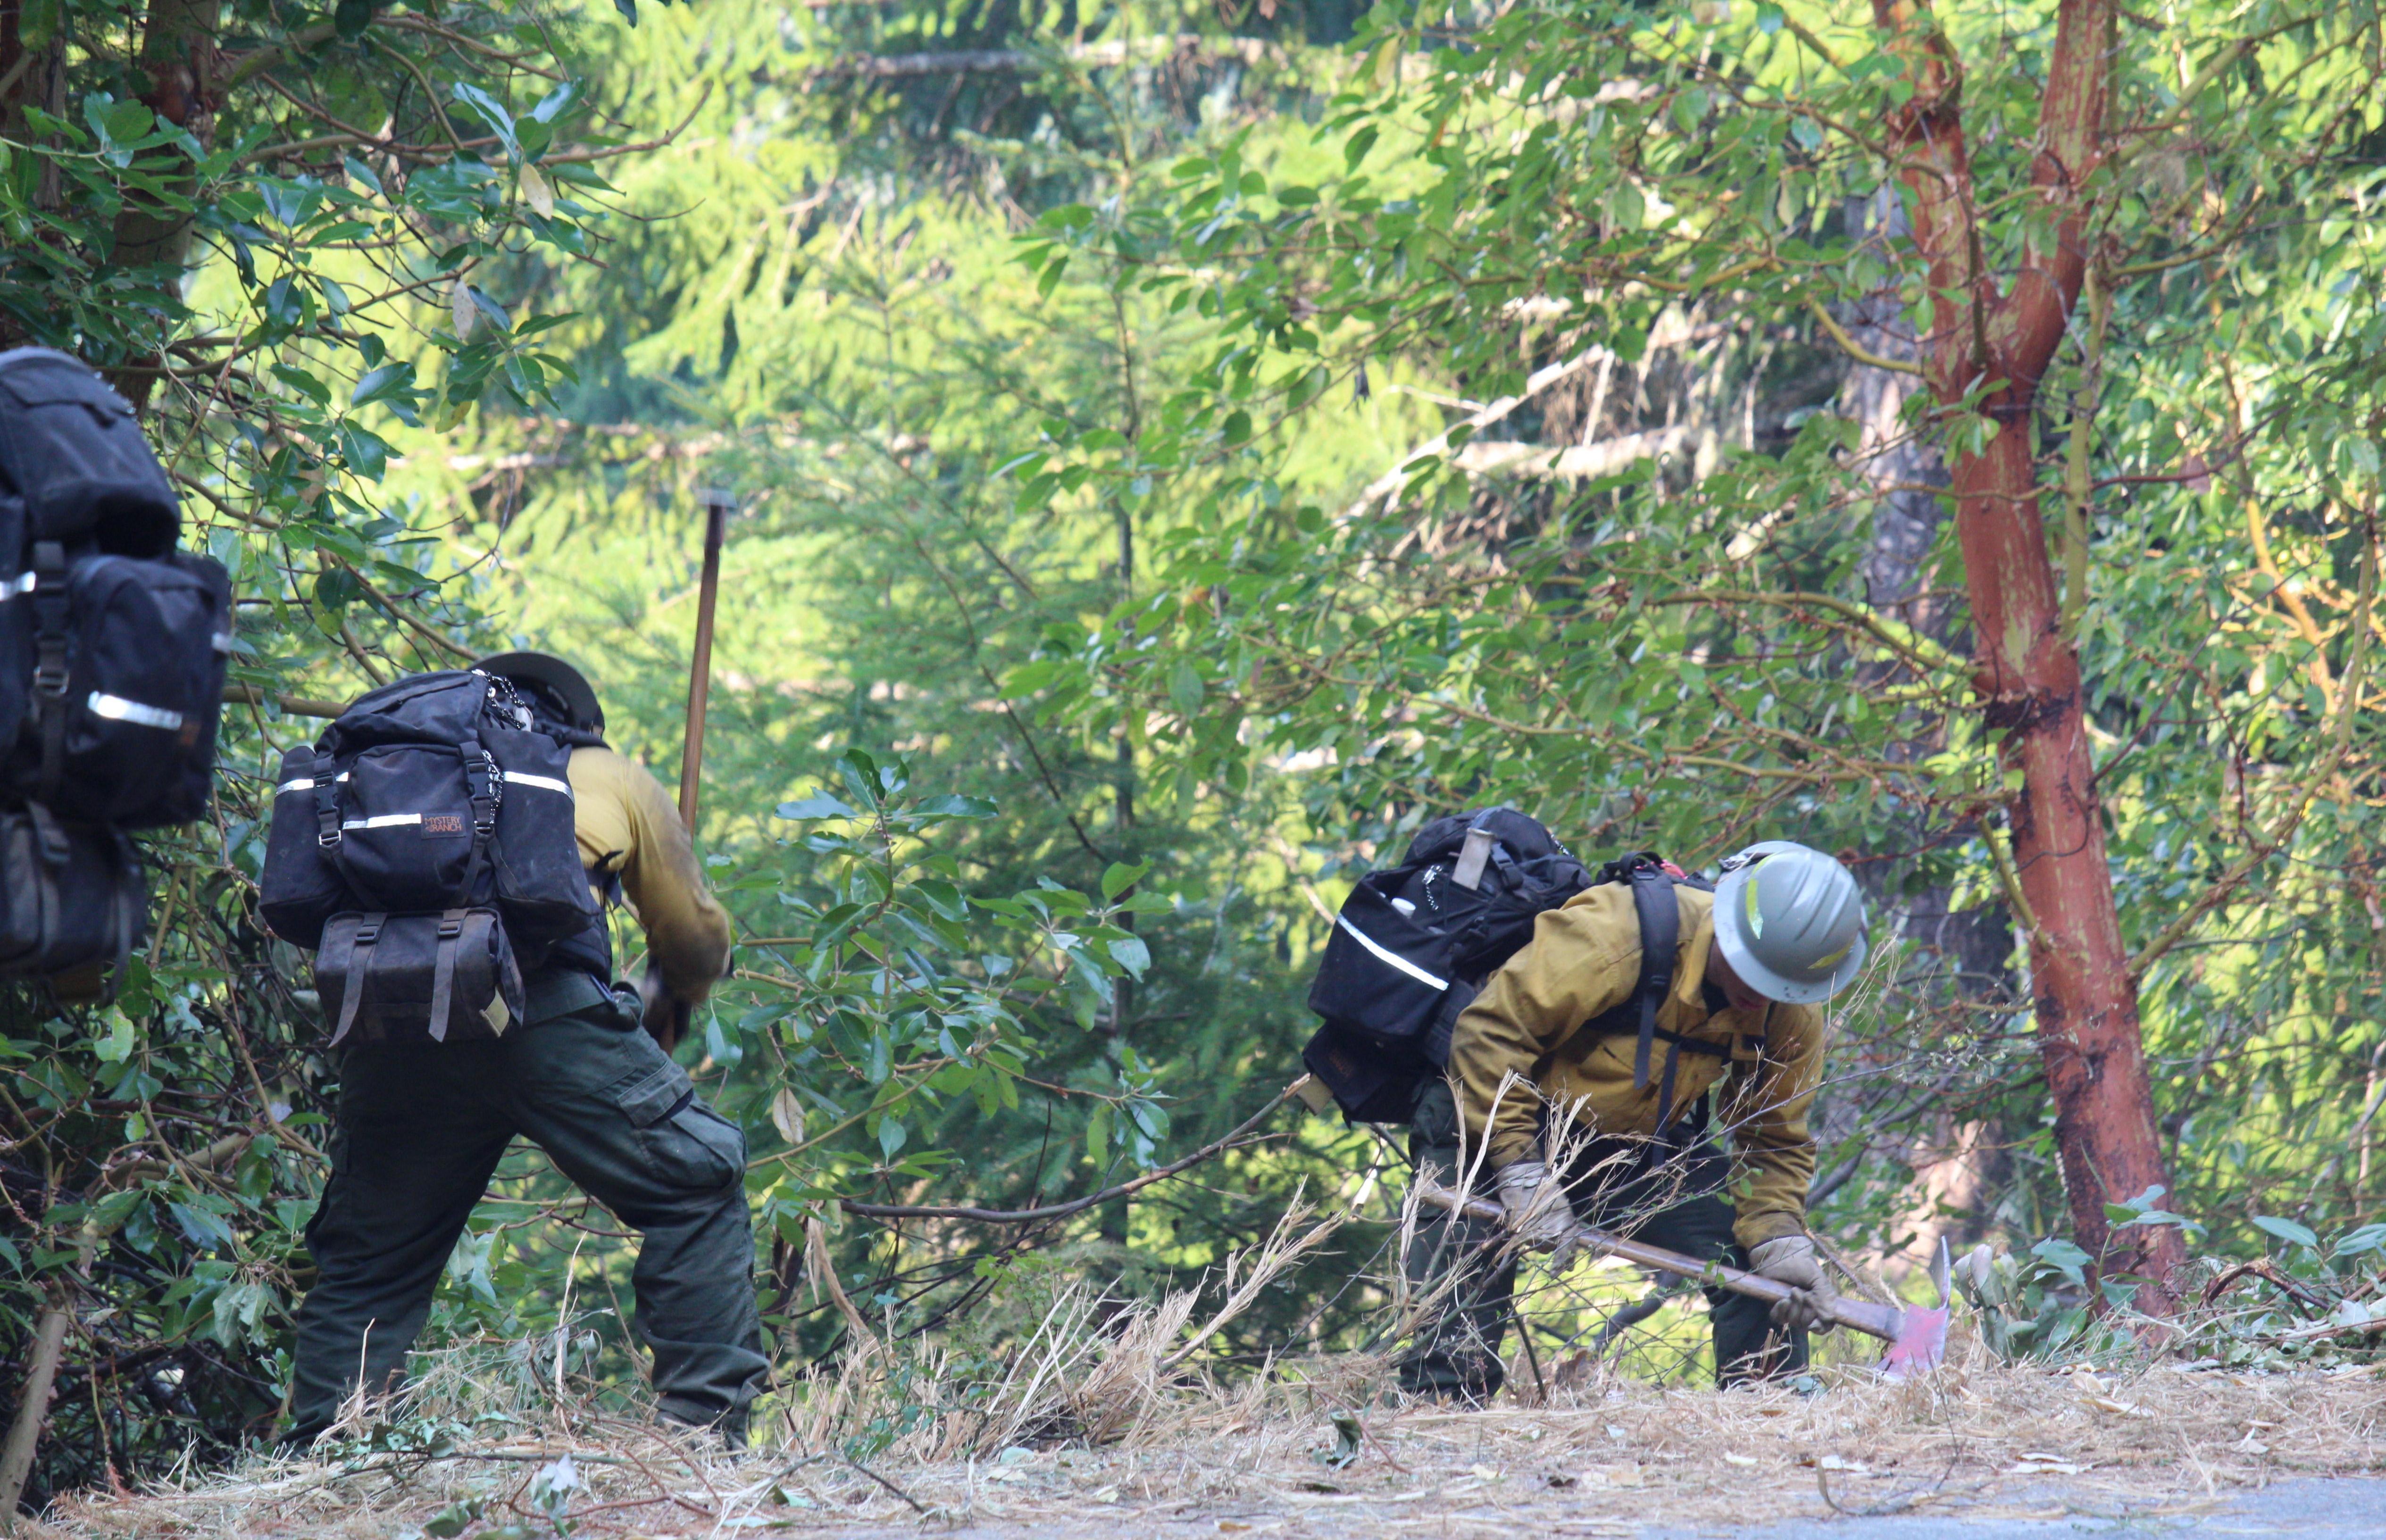 Two firefighters wearing black backpacks use specialized axes to chop brush and limbs along a road in the forest